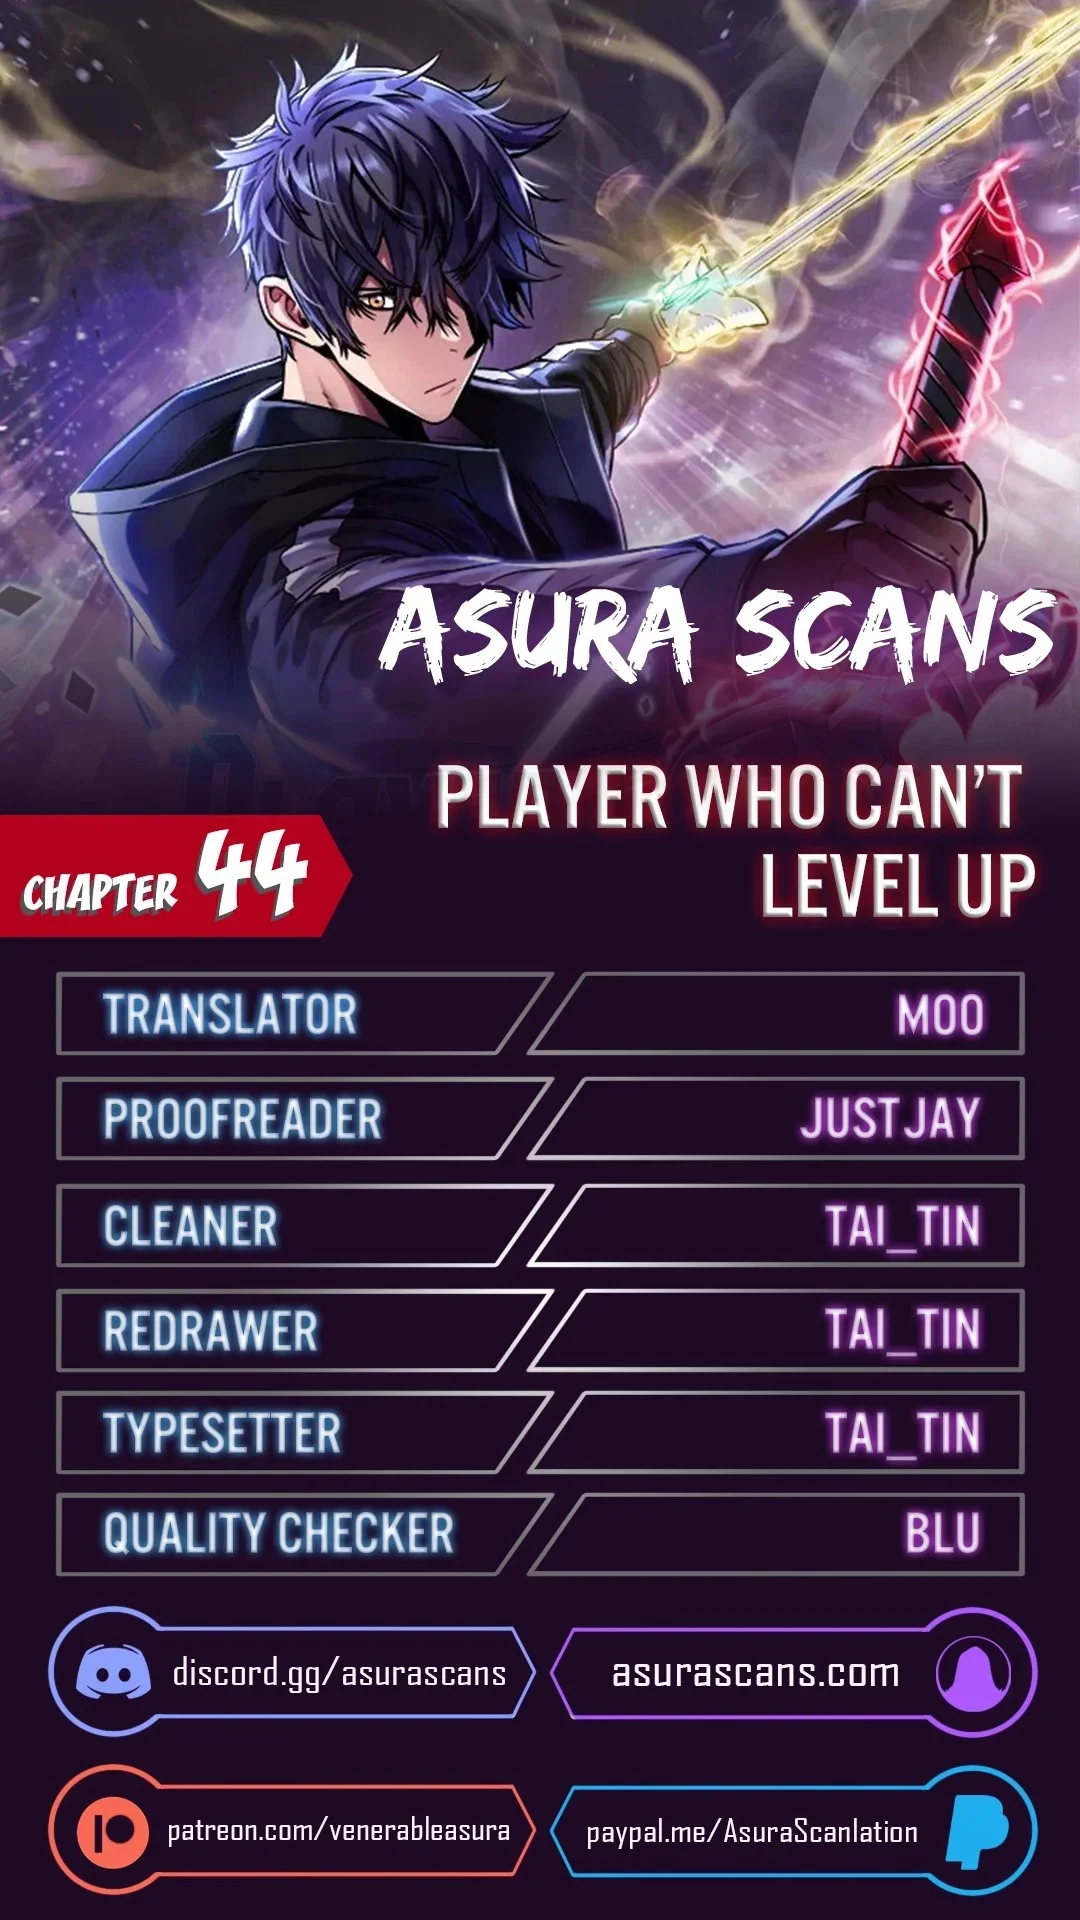 player-who-cant-level-up-chap-44-0